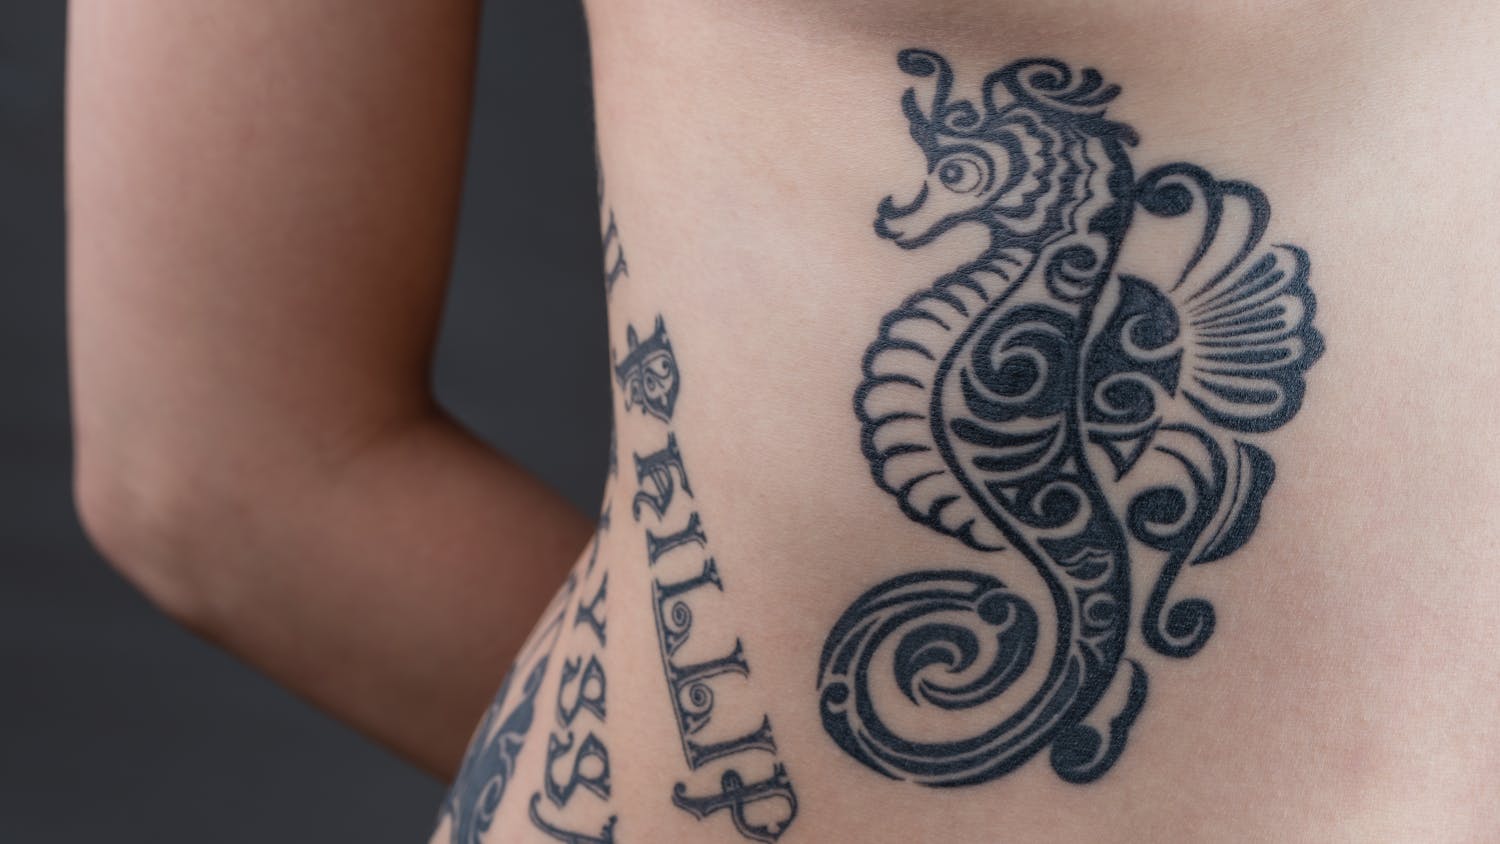 Why You Should NEVER Get A Tattoo Of Your Child's Name - Netmums